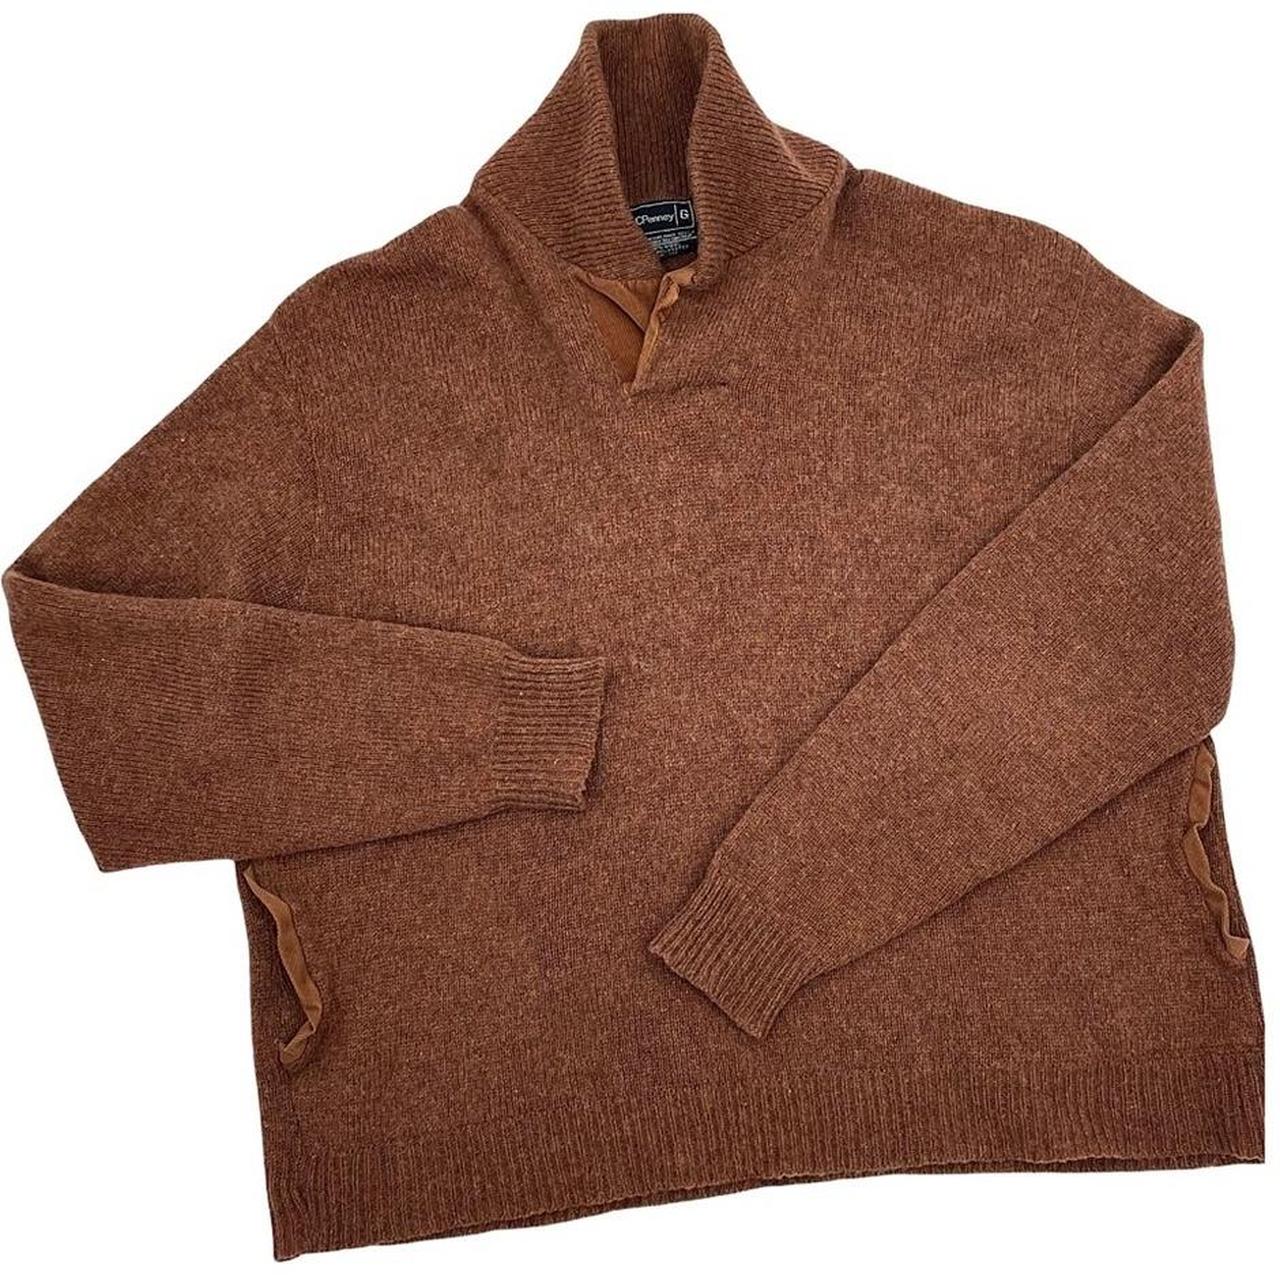 Product Image 2 - Vintage JCPenney oversized brown sweater